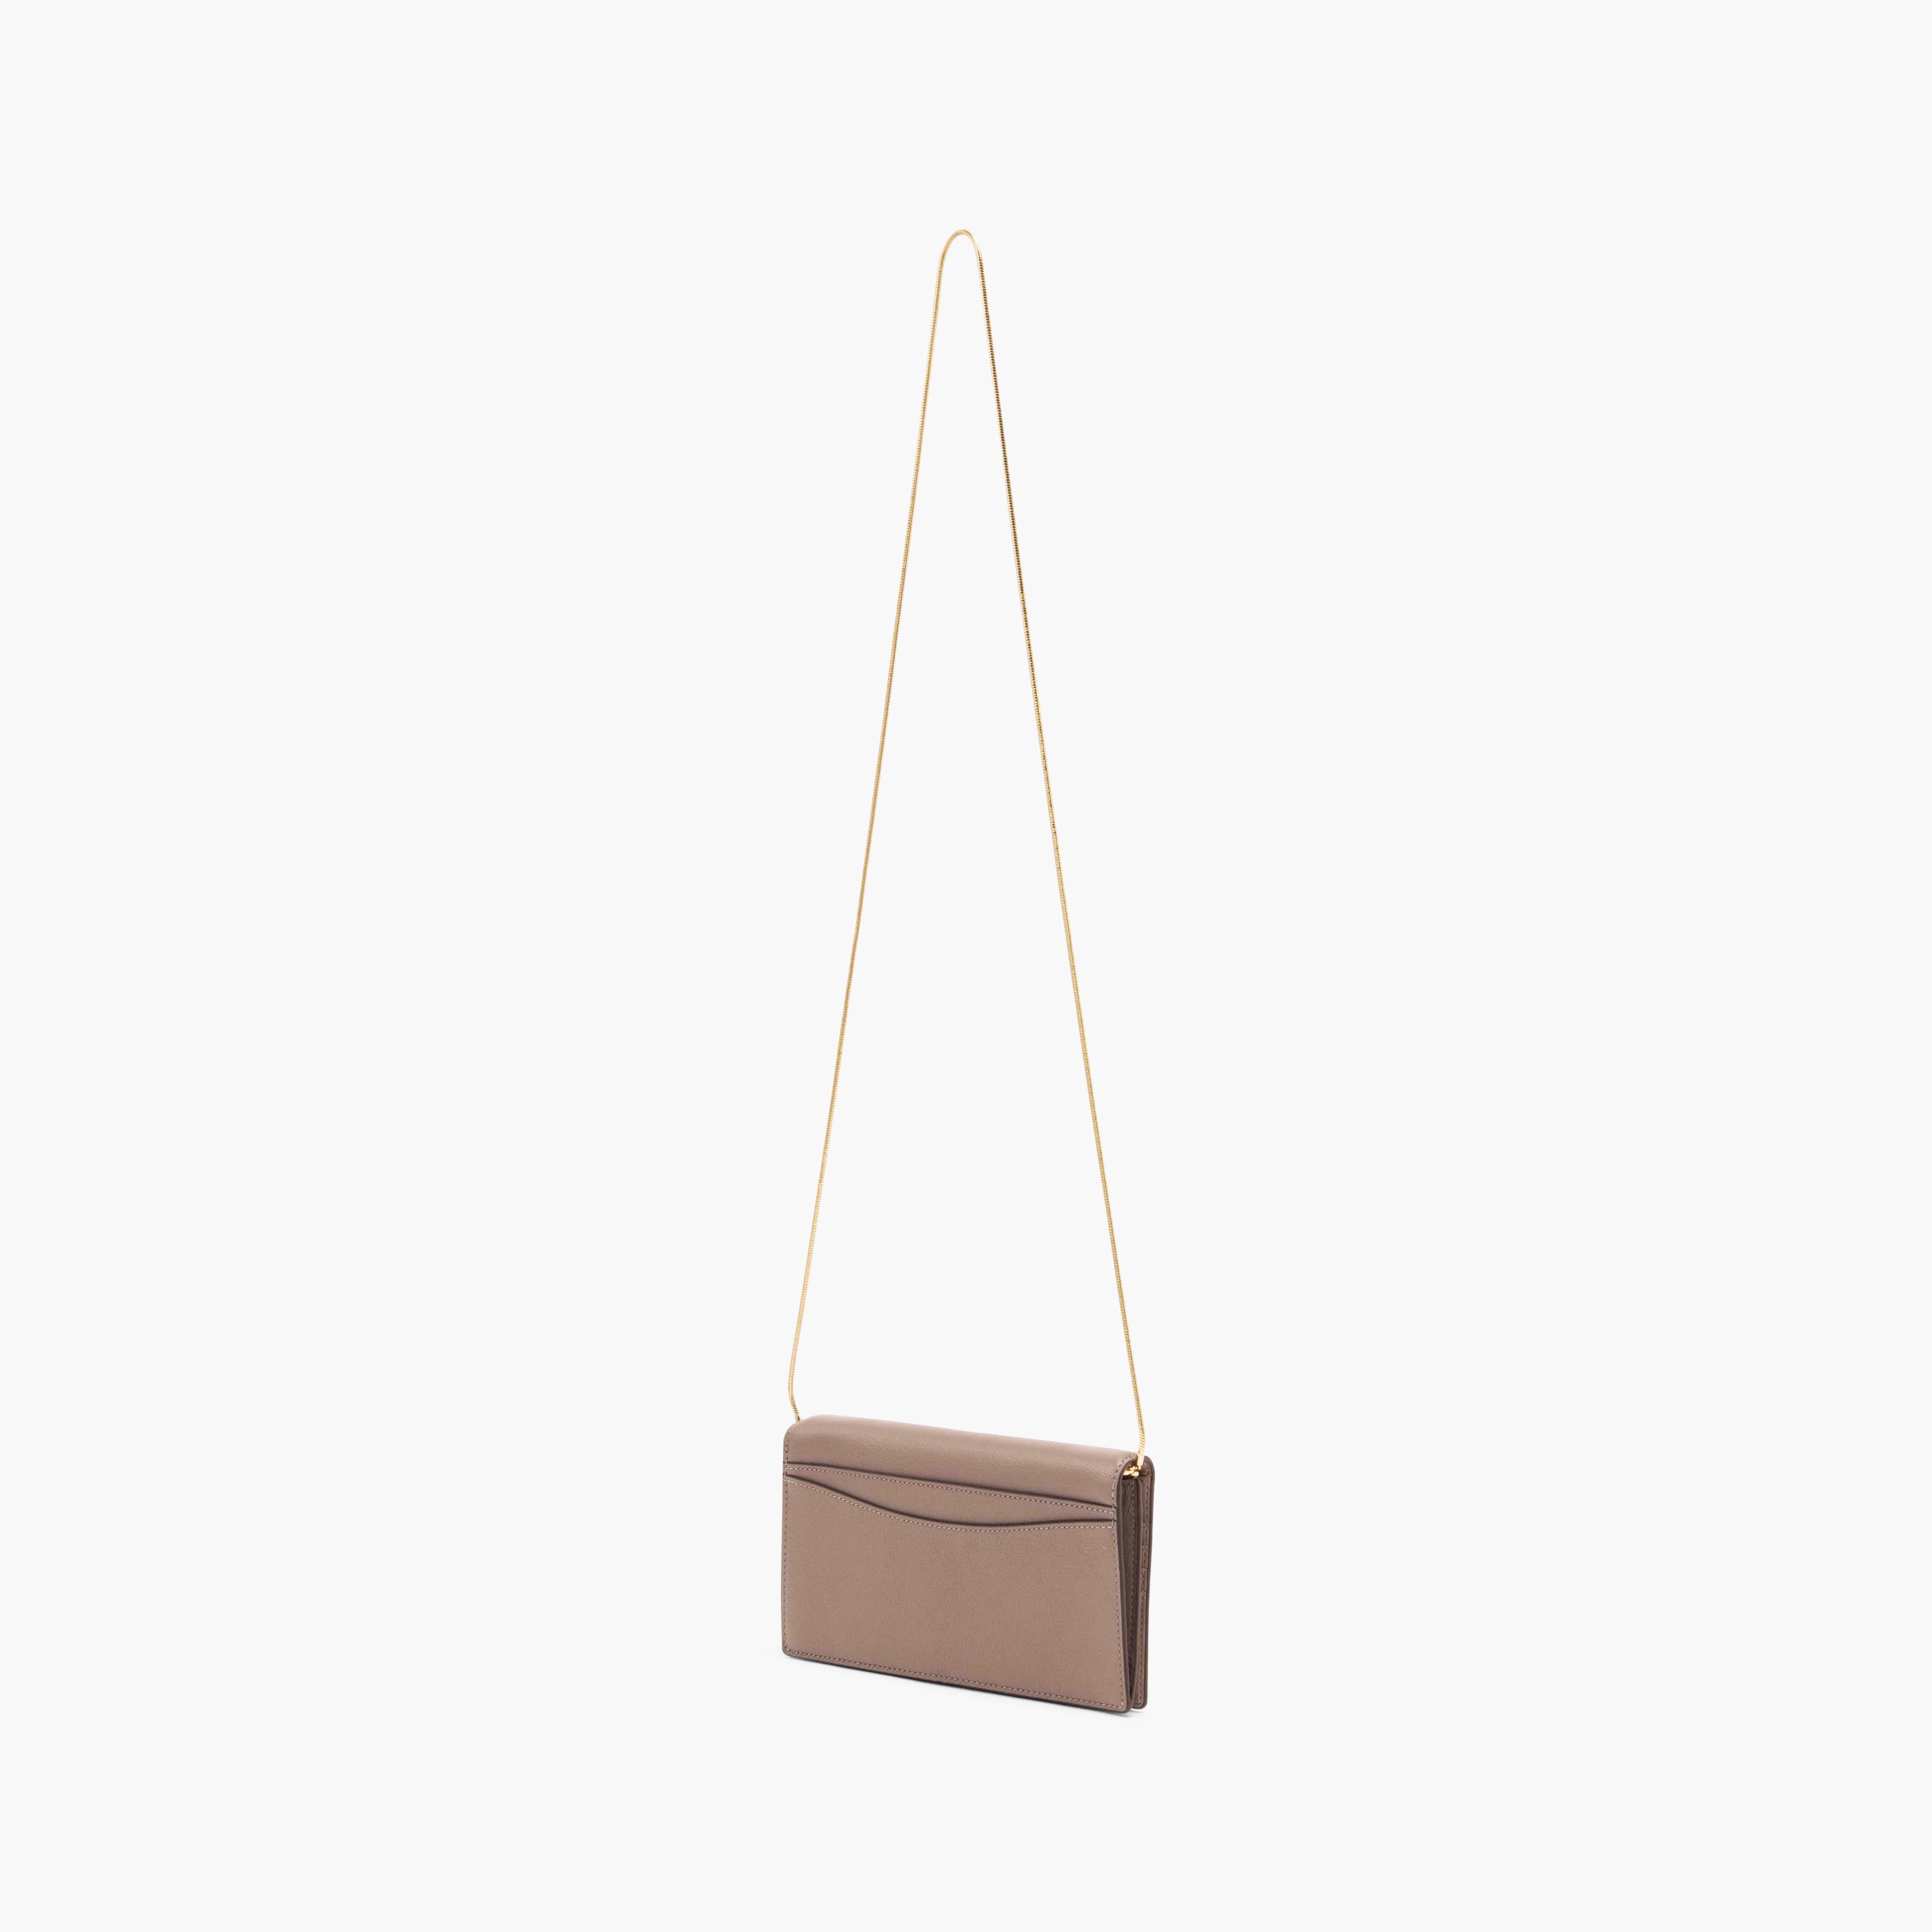 Mini Trouble of Marc Jacobs - Beige leather bag with gold colored